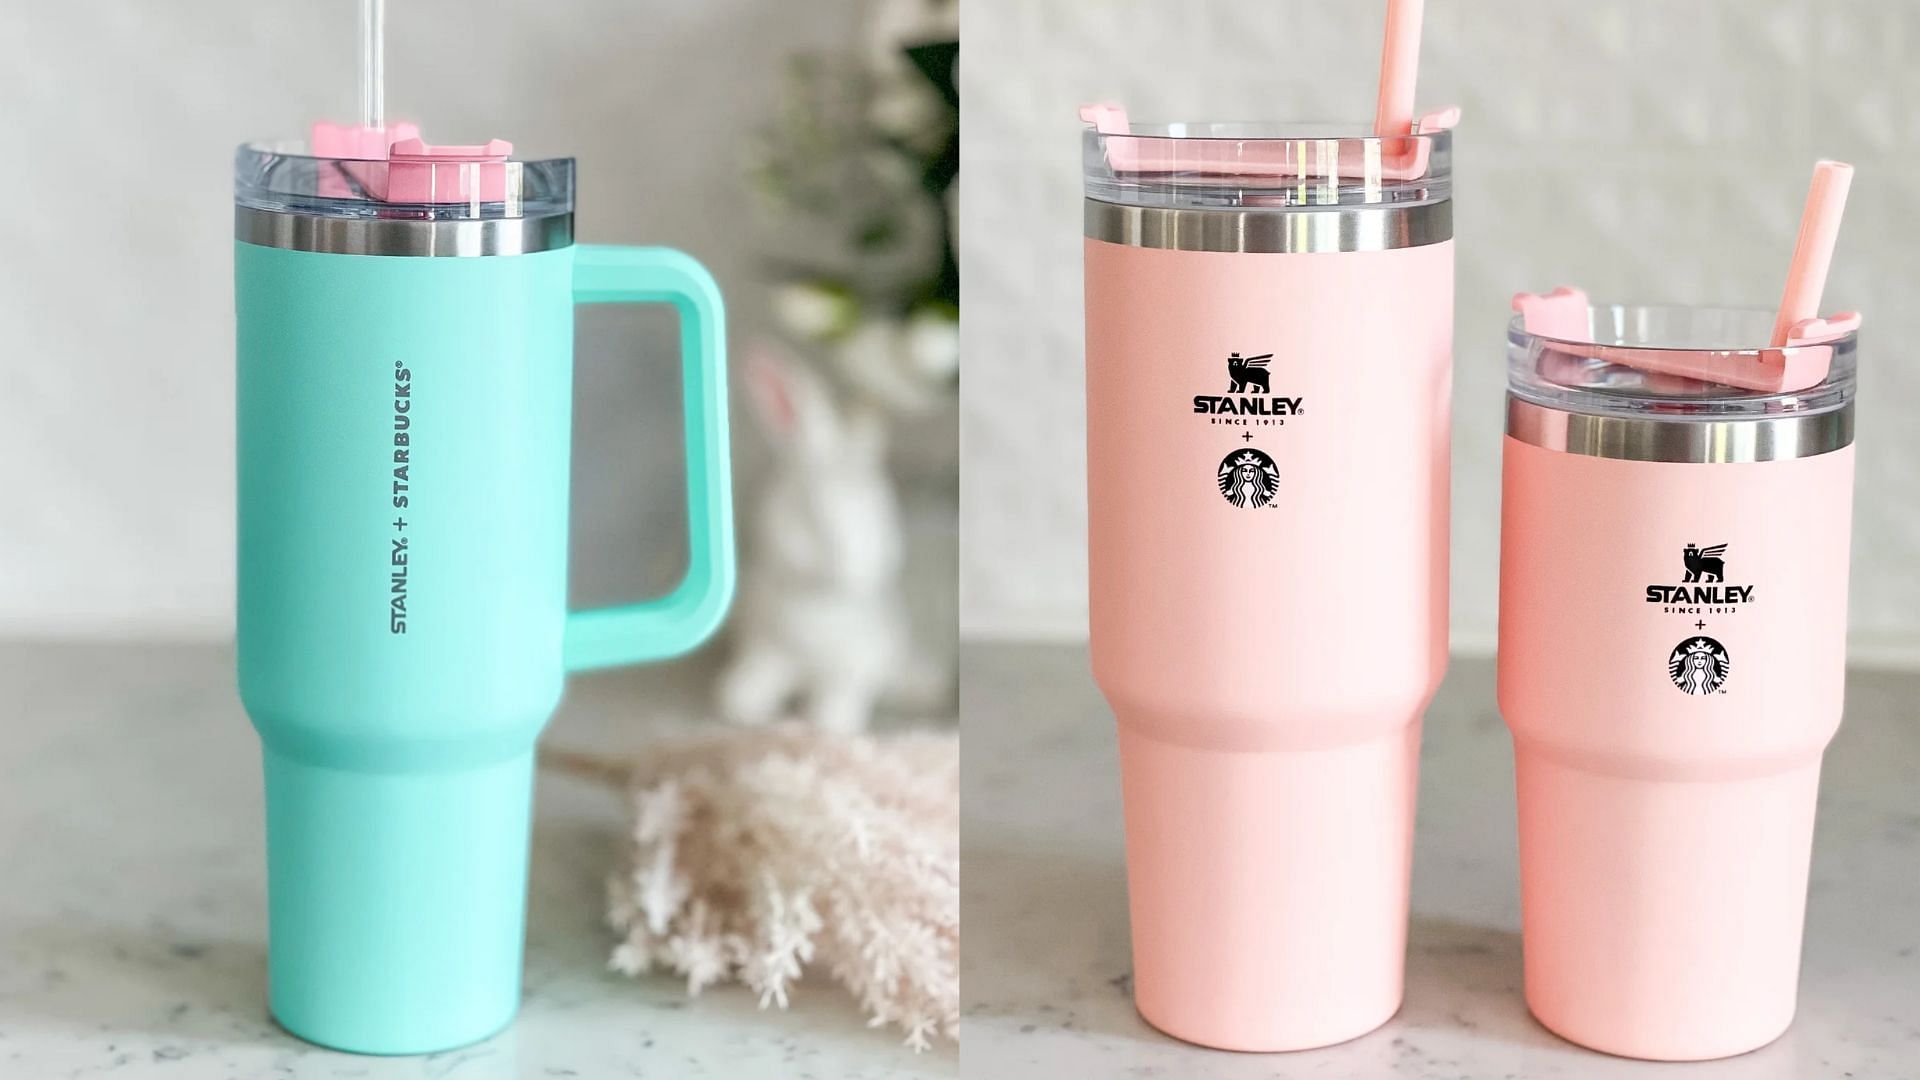 Stanley x Starbucks cups Where to buy and all you need to know